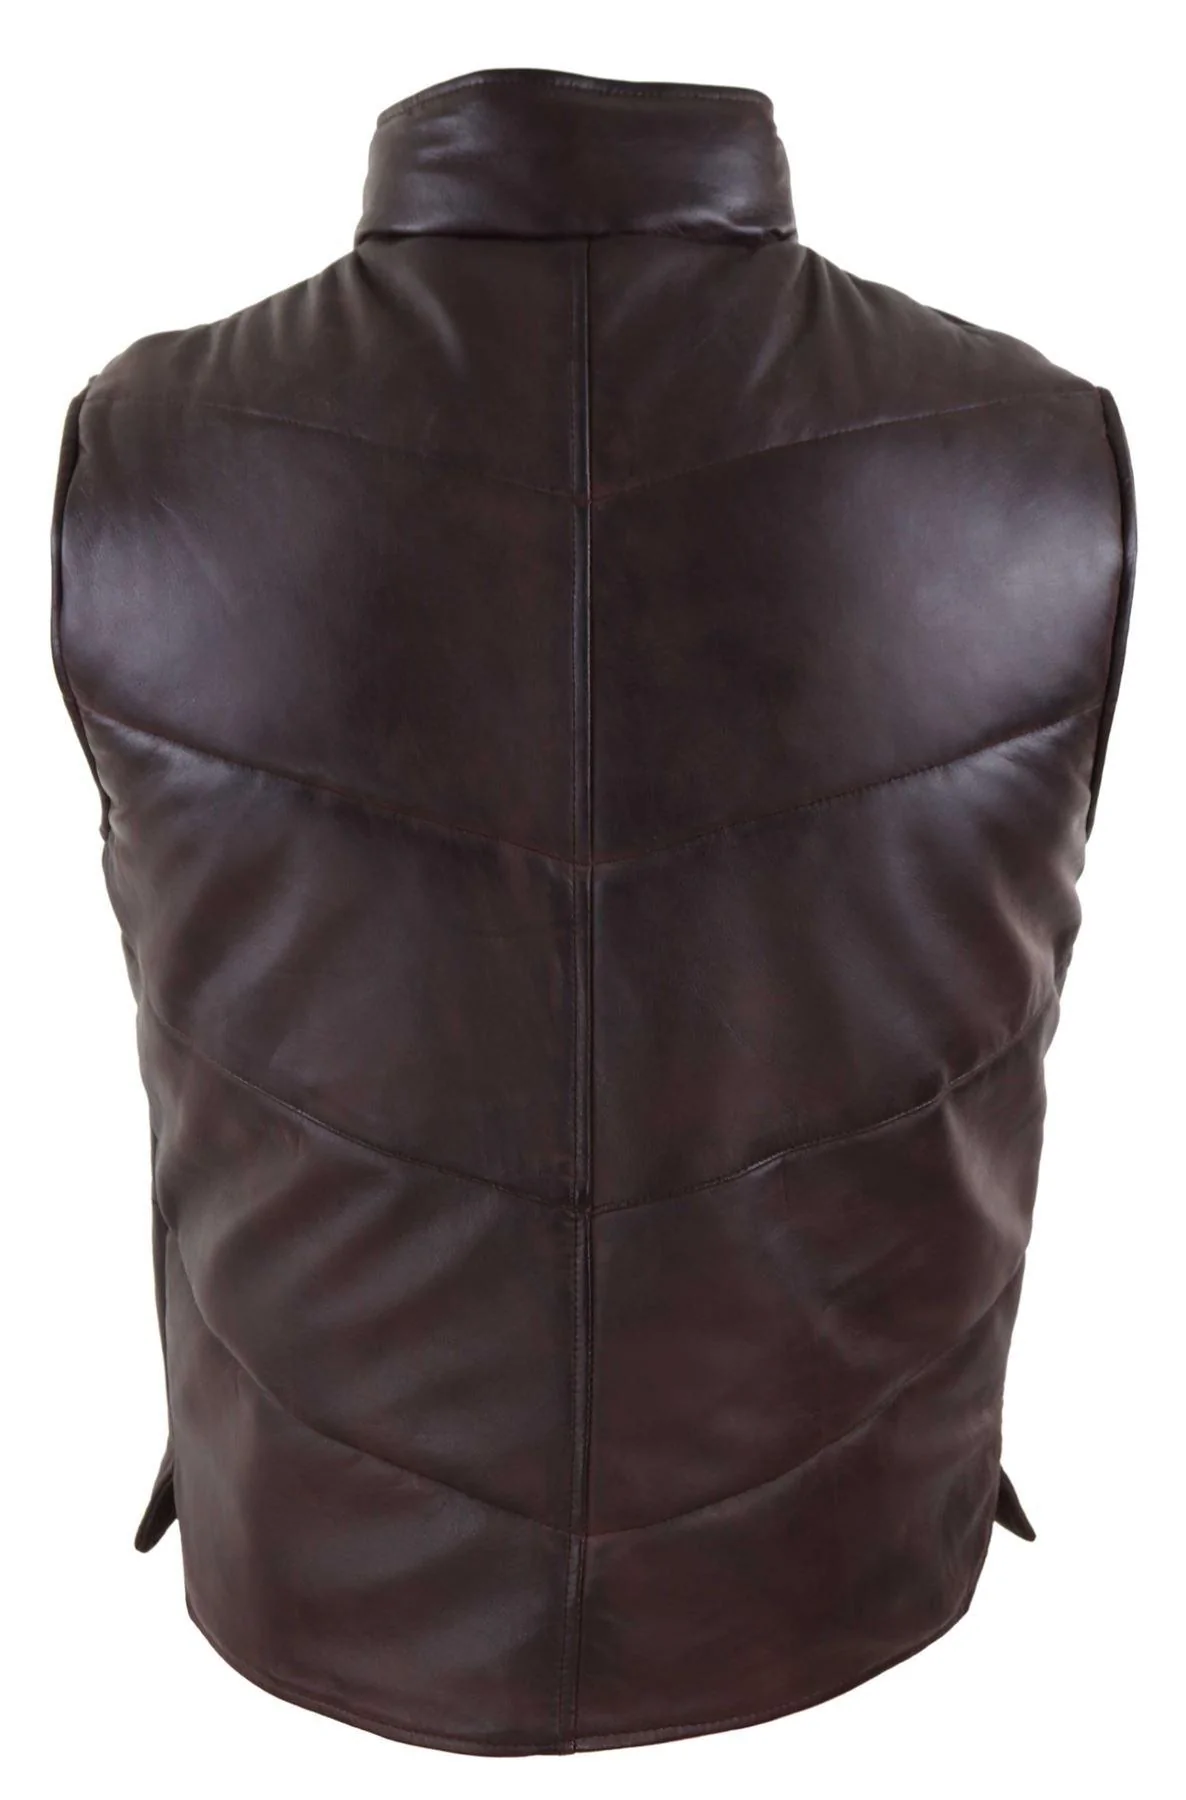 Men's Quilted Puffer Design Leather Waistcoat